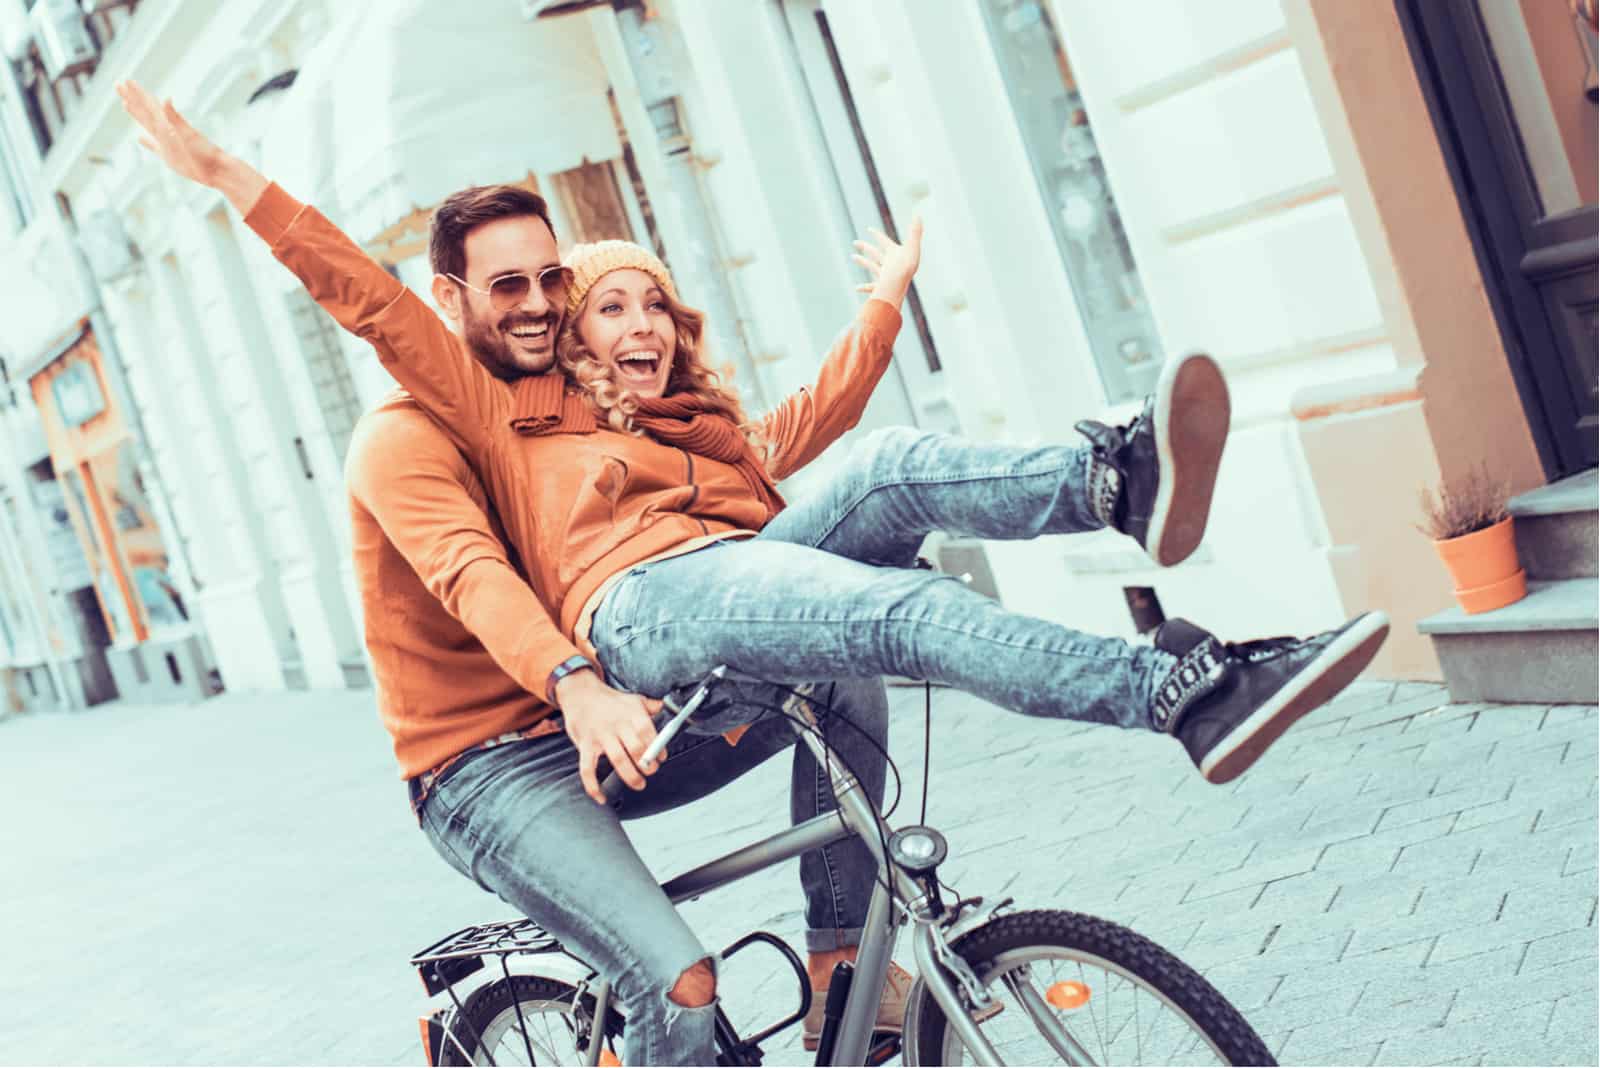 a smiling woman rides a bicycle with a man